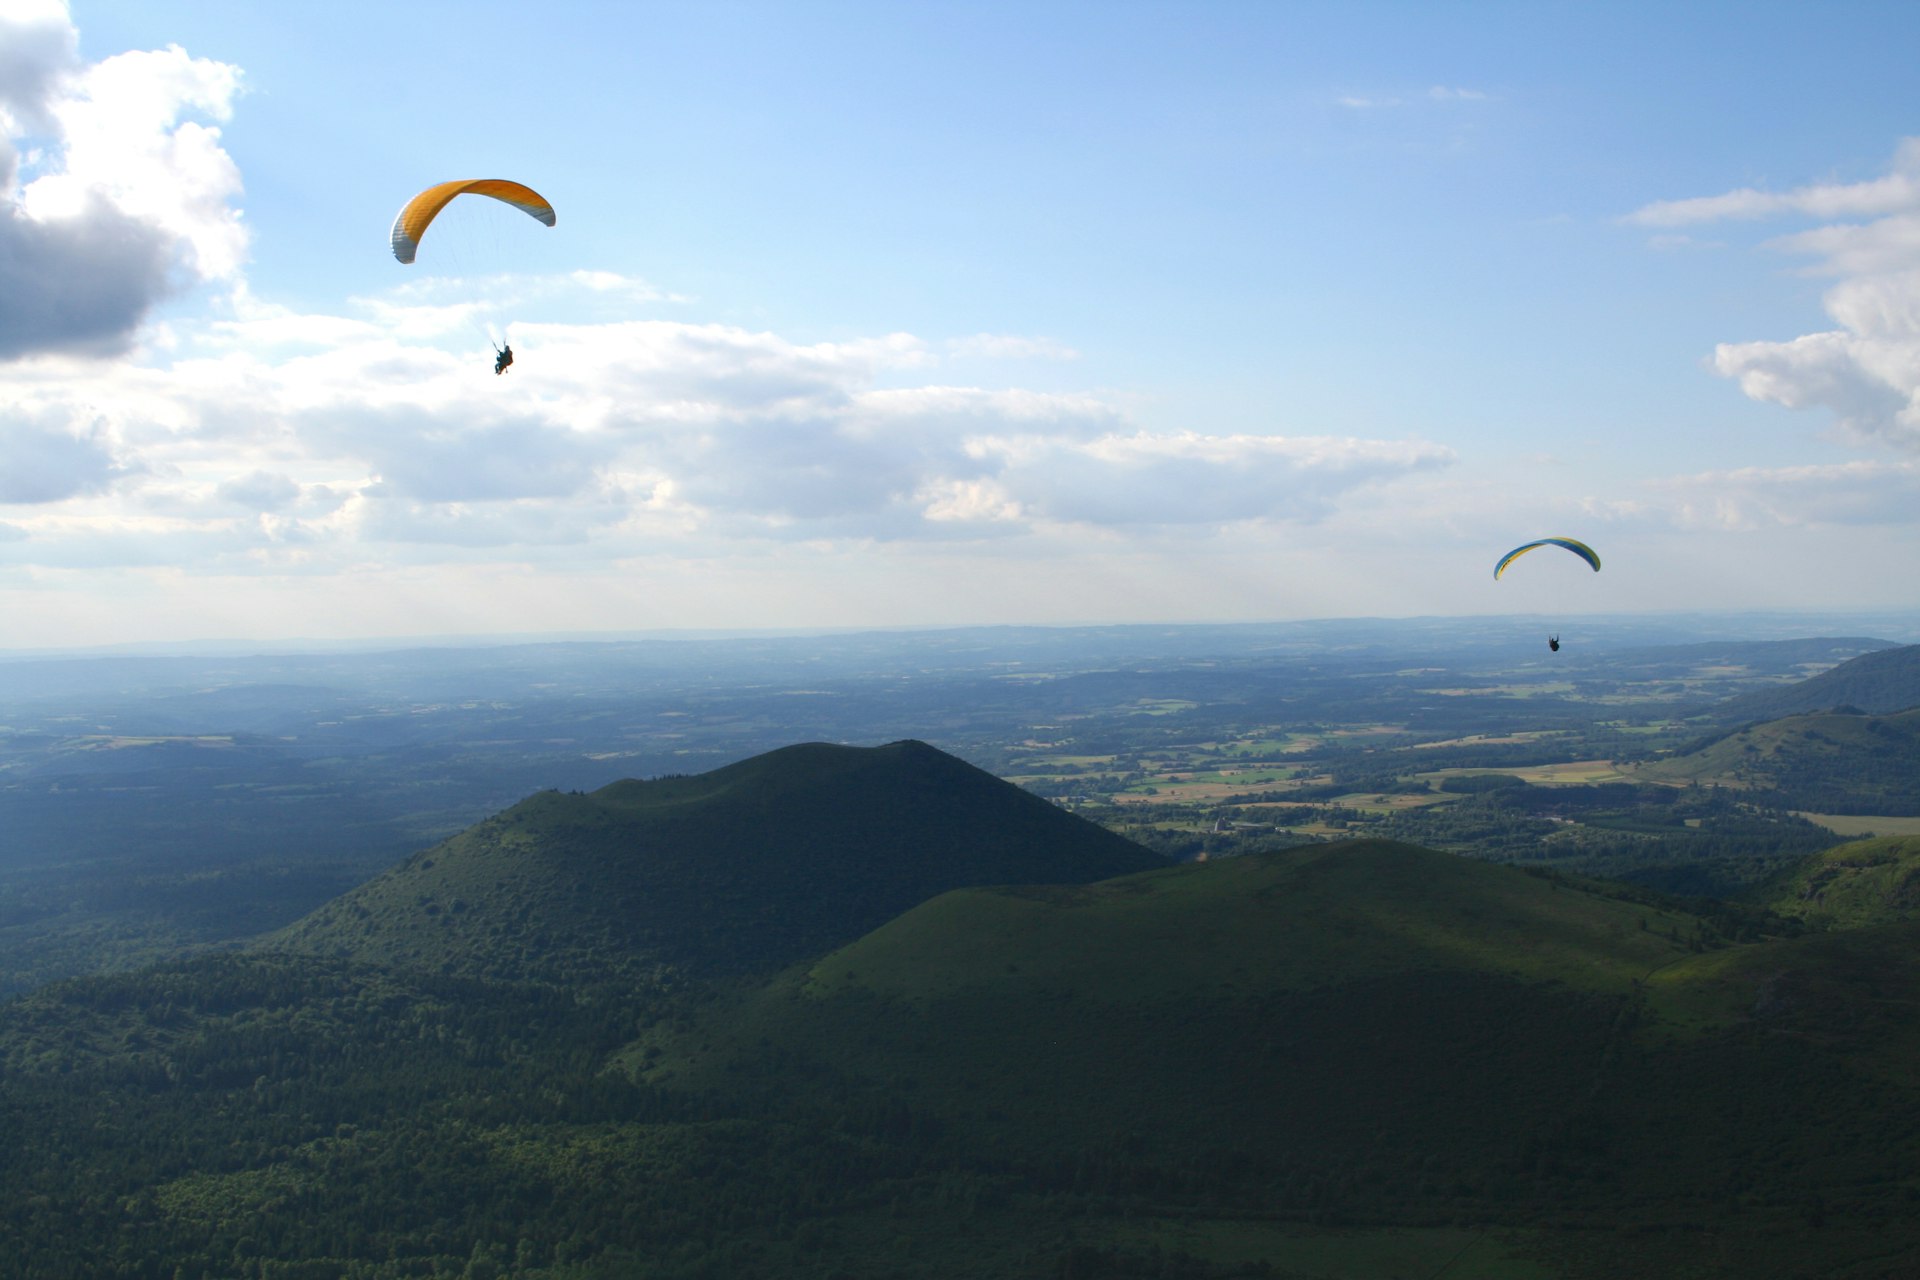 Paragliding in Puy de Dôme in the Auvergne region of France